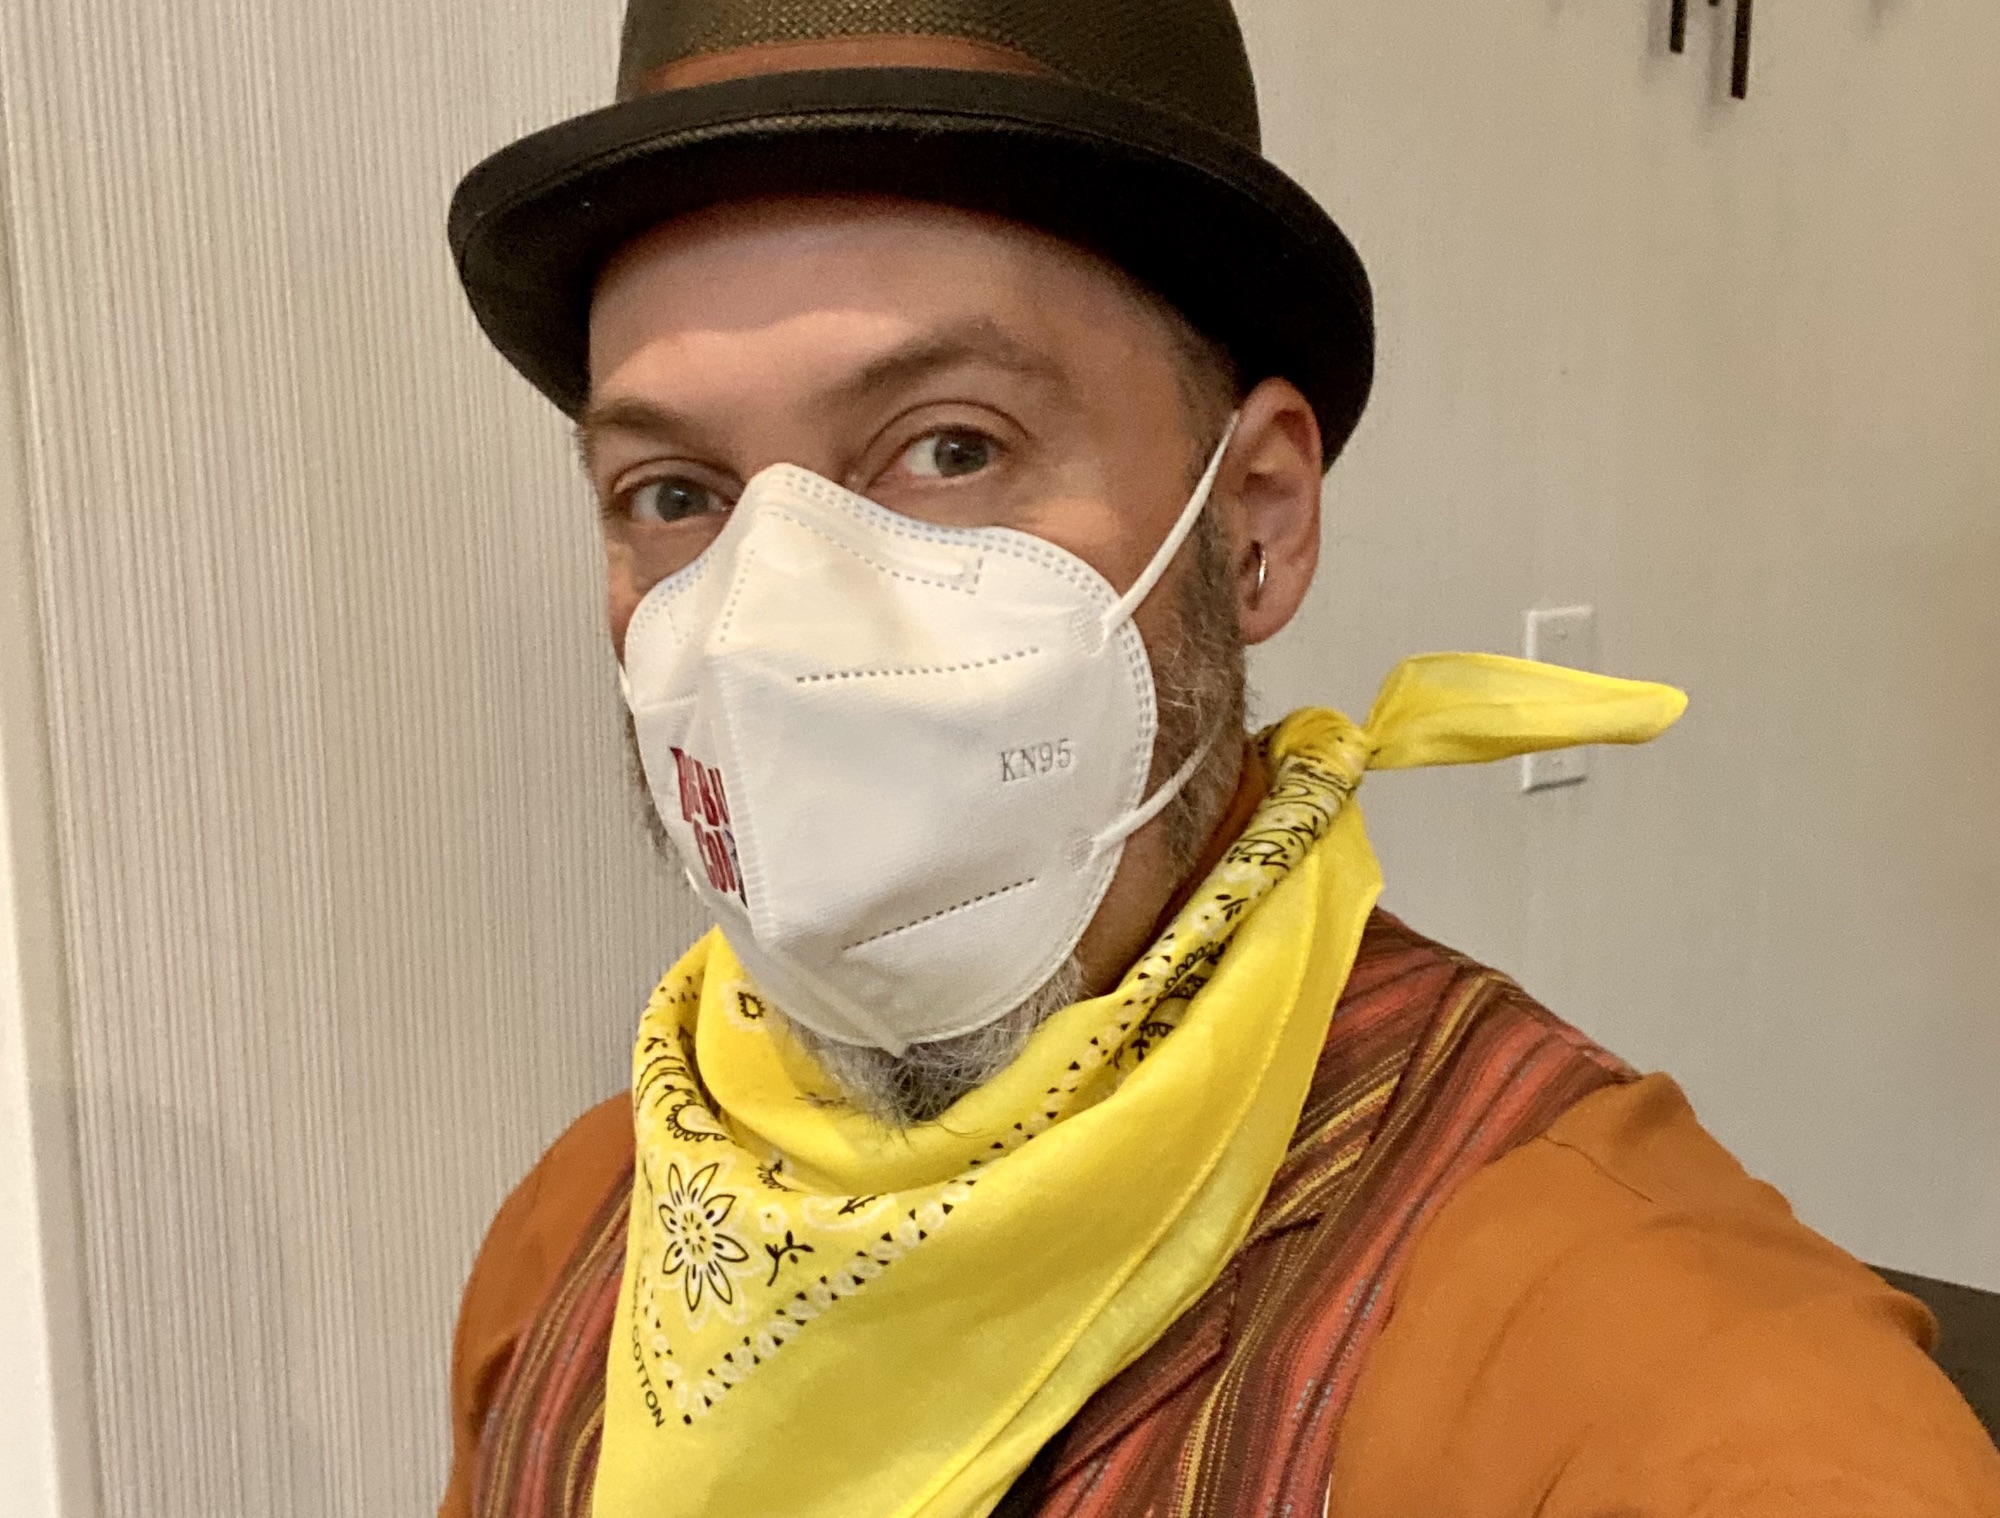 Me doing my Big Bad Con greeter shift, dressed snappy with a bowler, vest, tie, my yellow Ranger bandana, and a N95 mask.